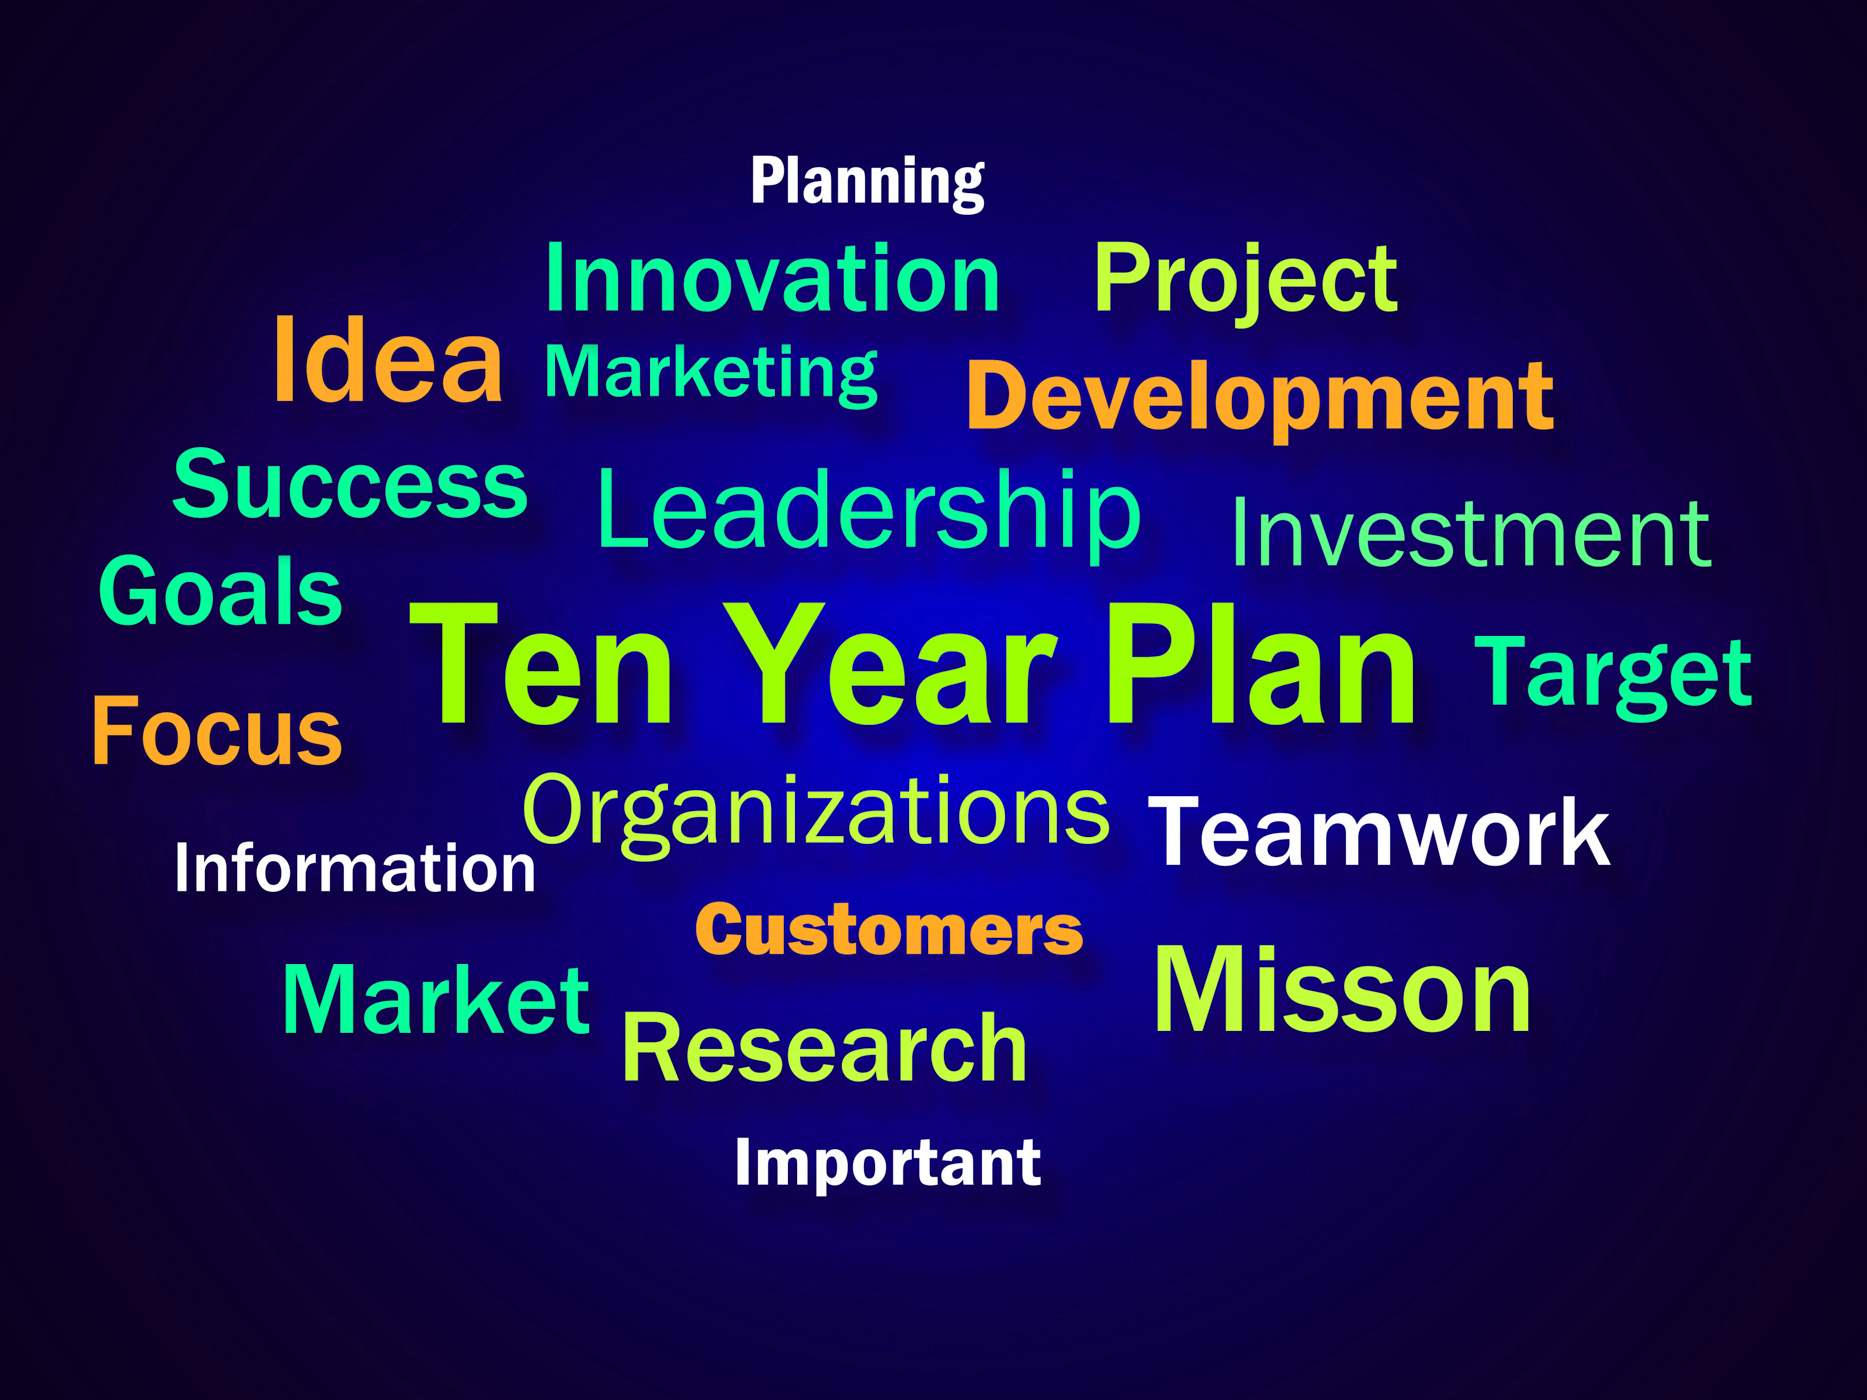 Ten Year Plan Brainstorm Means Company Schedule For 10 Years, Brainstorm, Next, Strategy, Schedule, HQ Photo